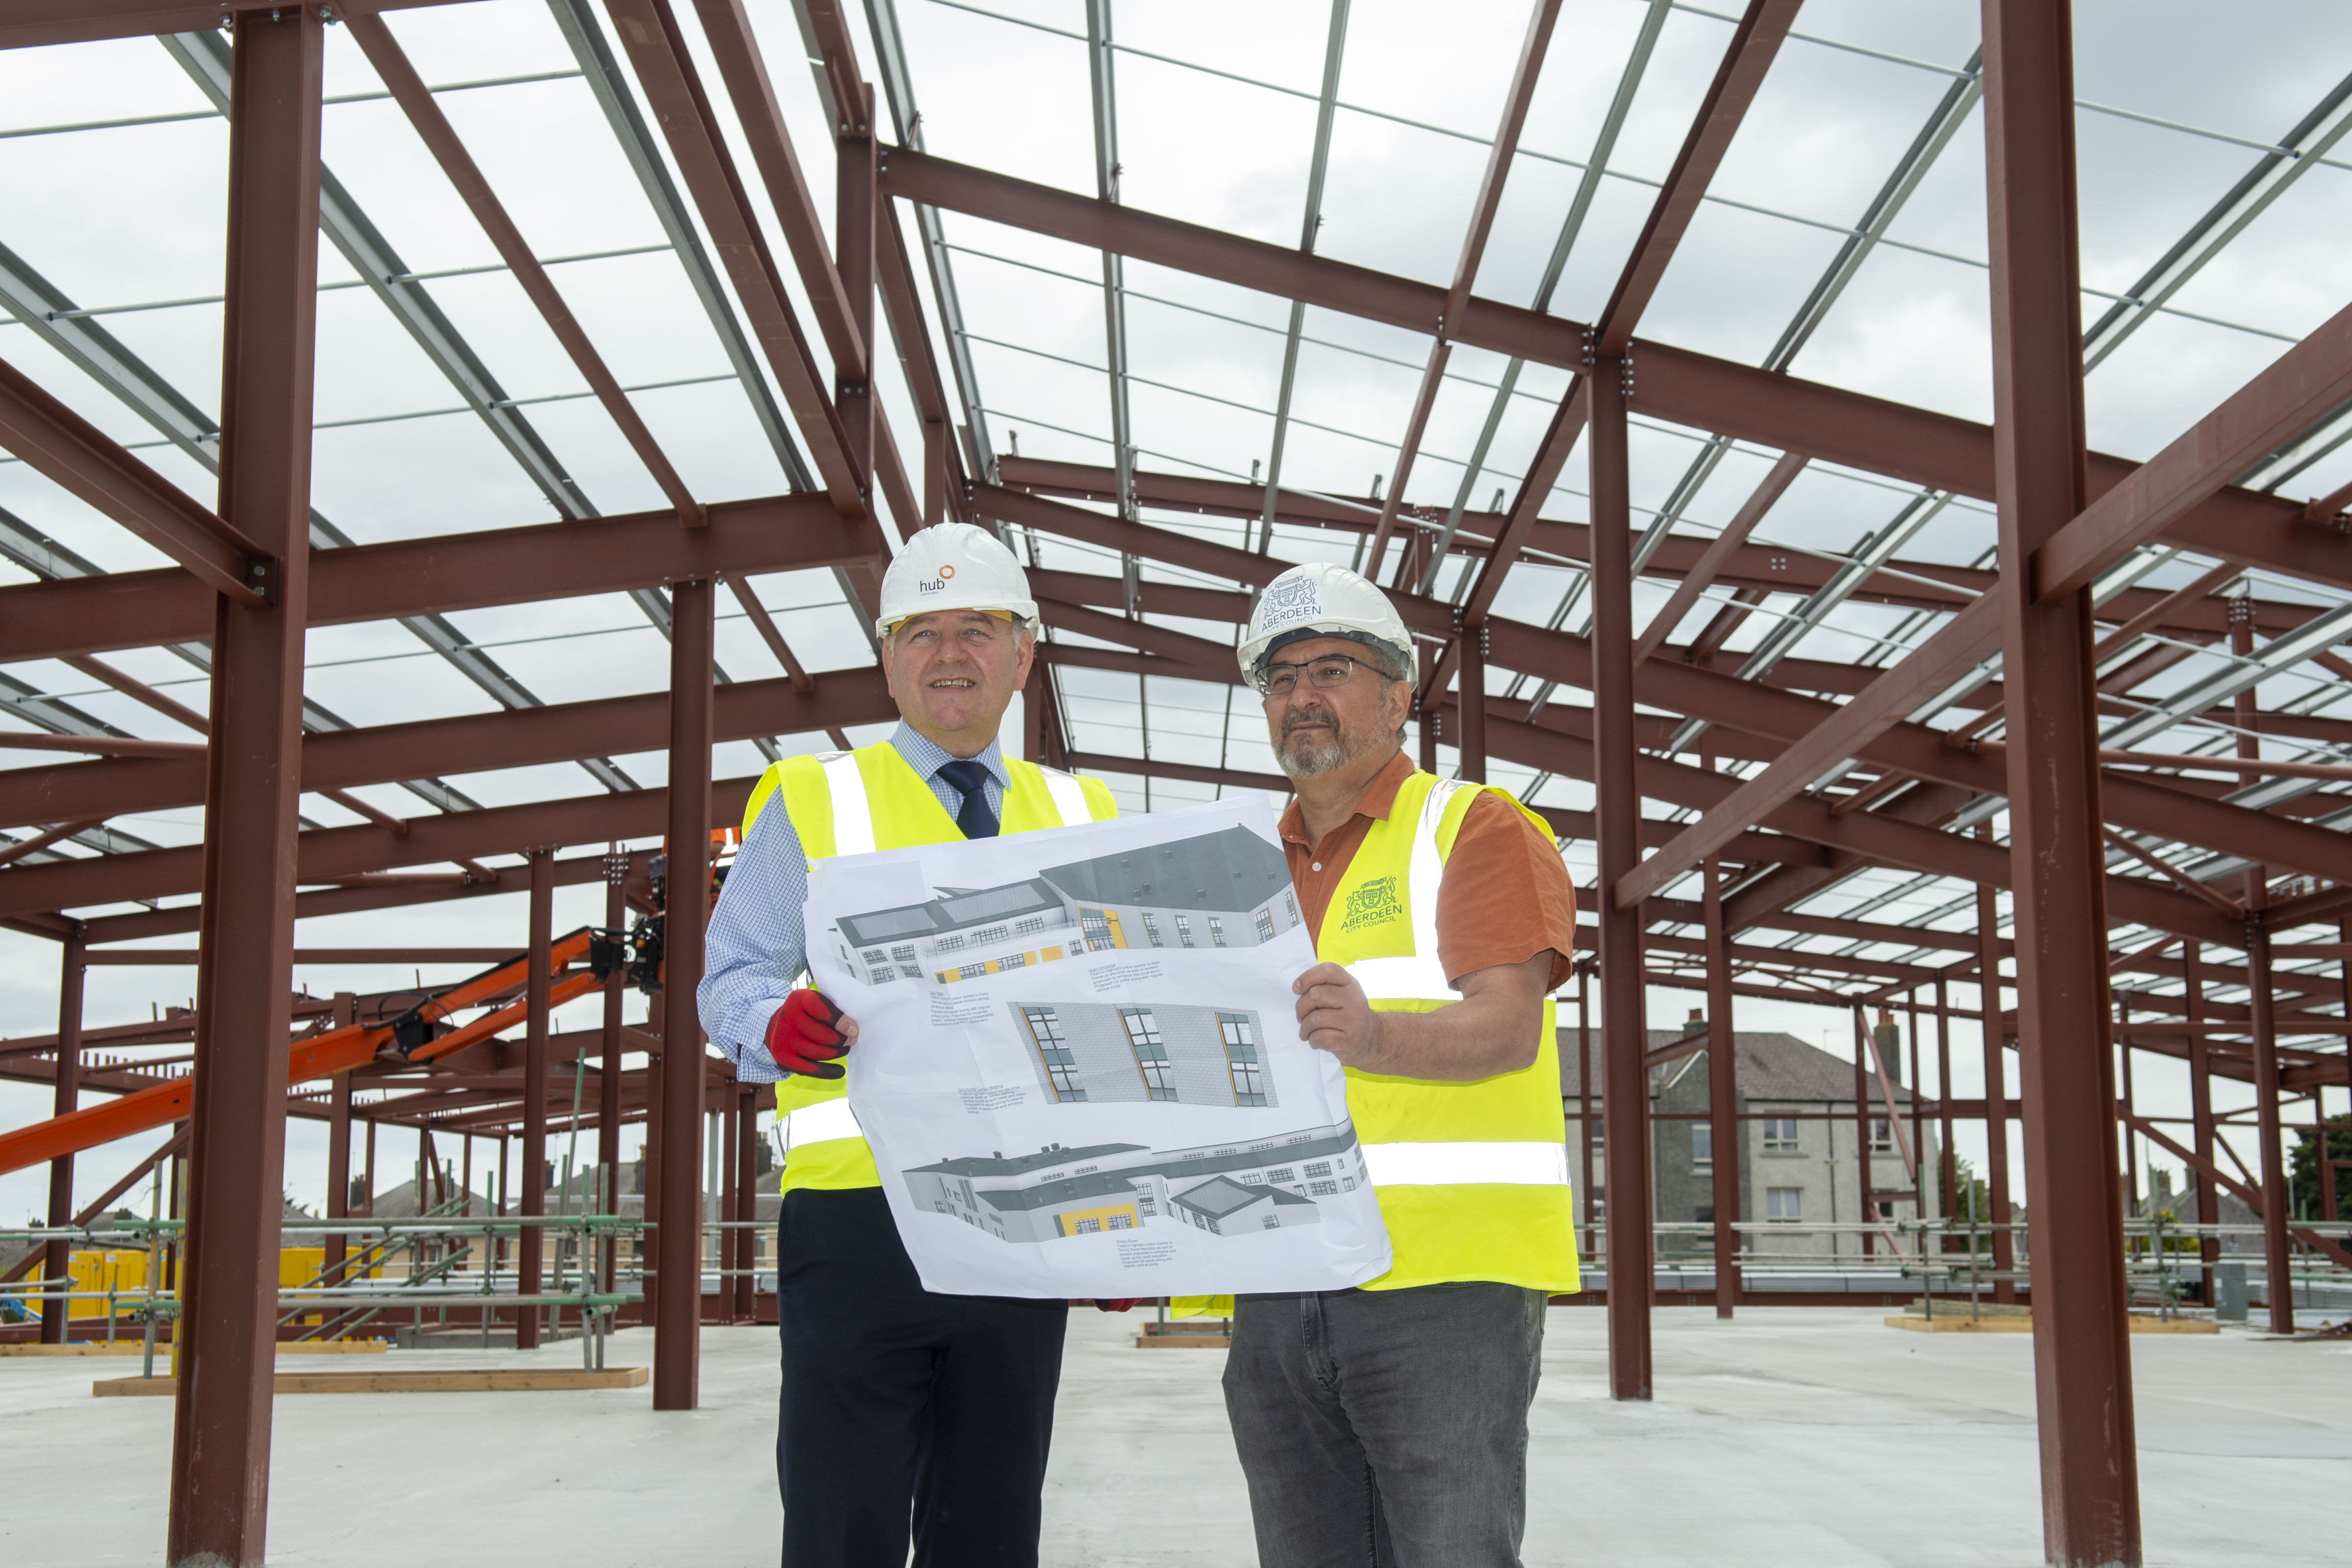 Aberdeen councillor hails progress on new Torry School and Community Hub